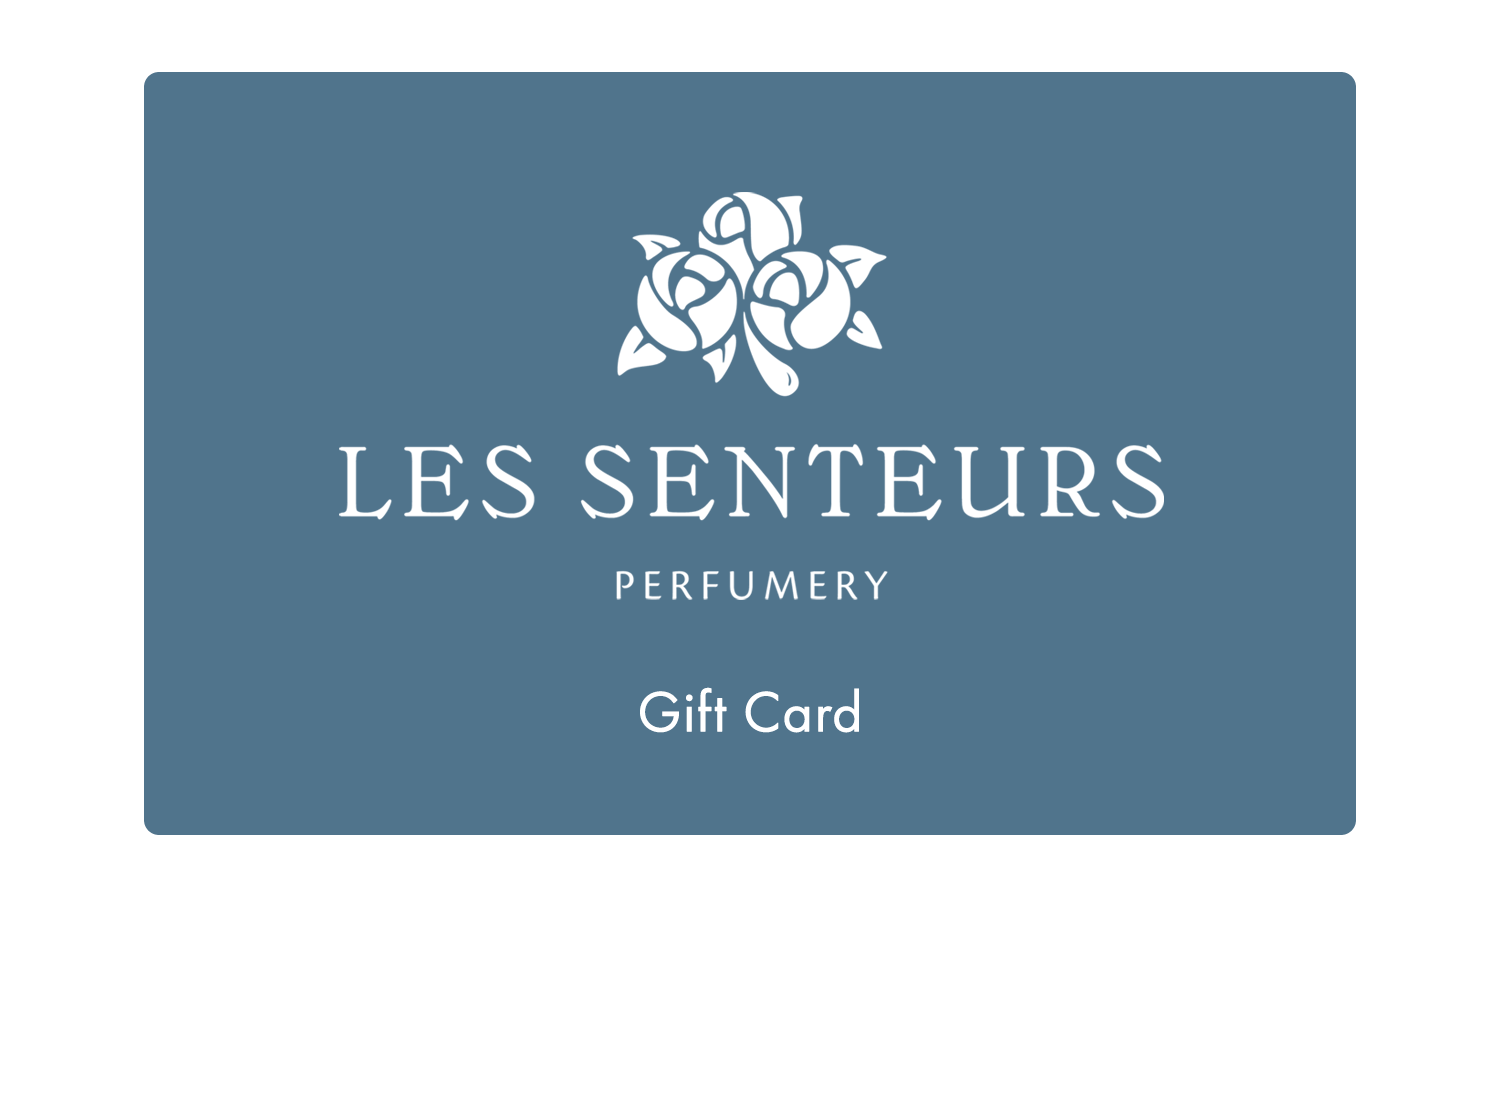 Les Senteurs - E-Gift Card - £25.00 - GIFTCARD25 - product image - Gift Card - Les Senteurs